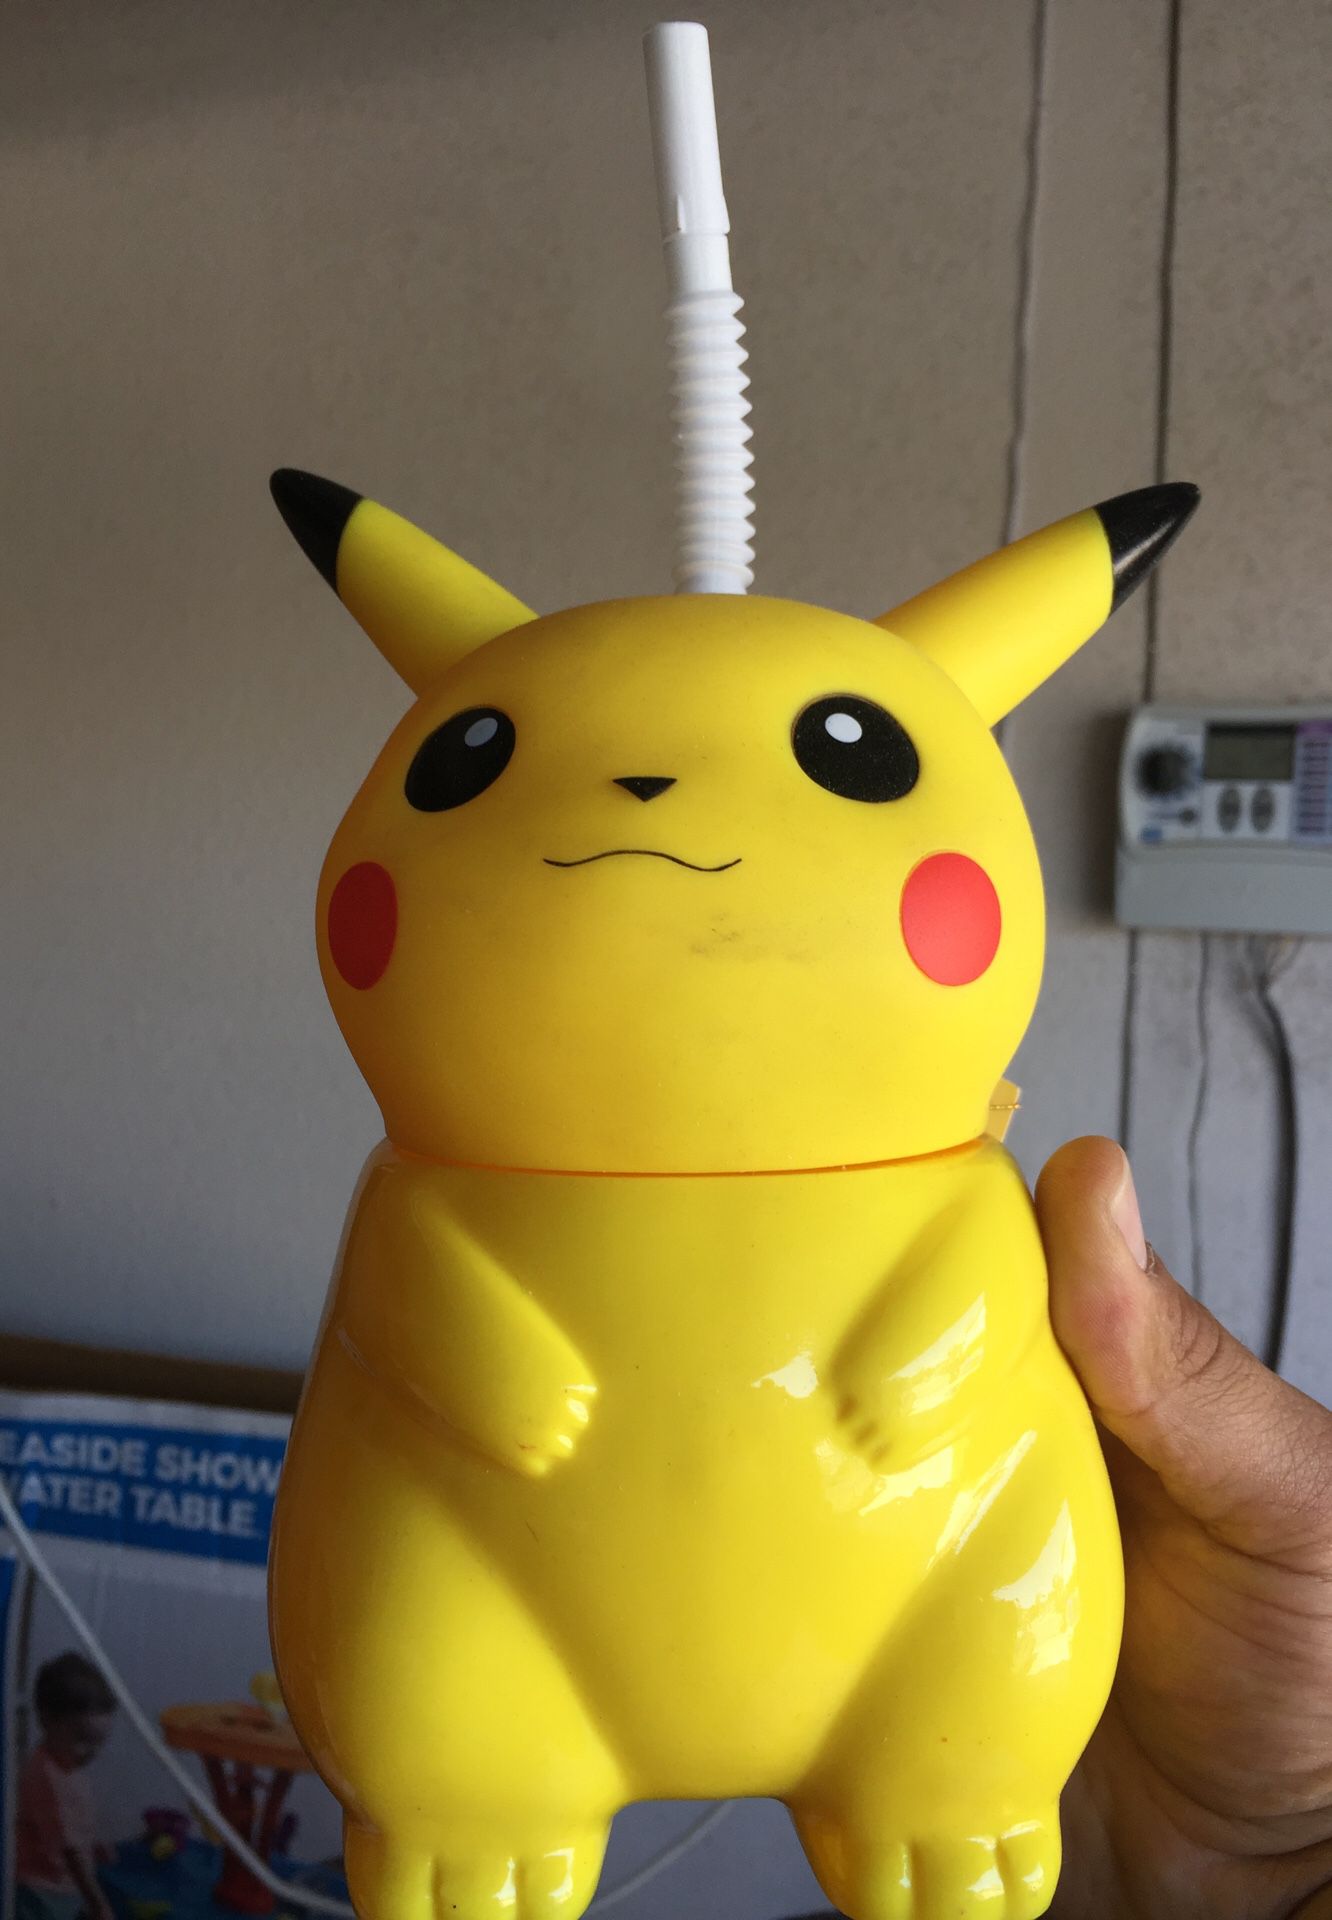 Rare 1999 Nintendo Pokemon Pikachu Sipper Bottle with Straw Drink Cup Container